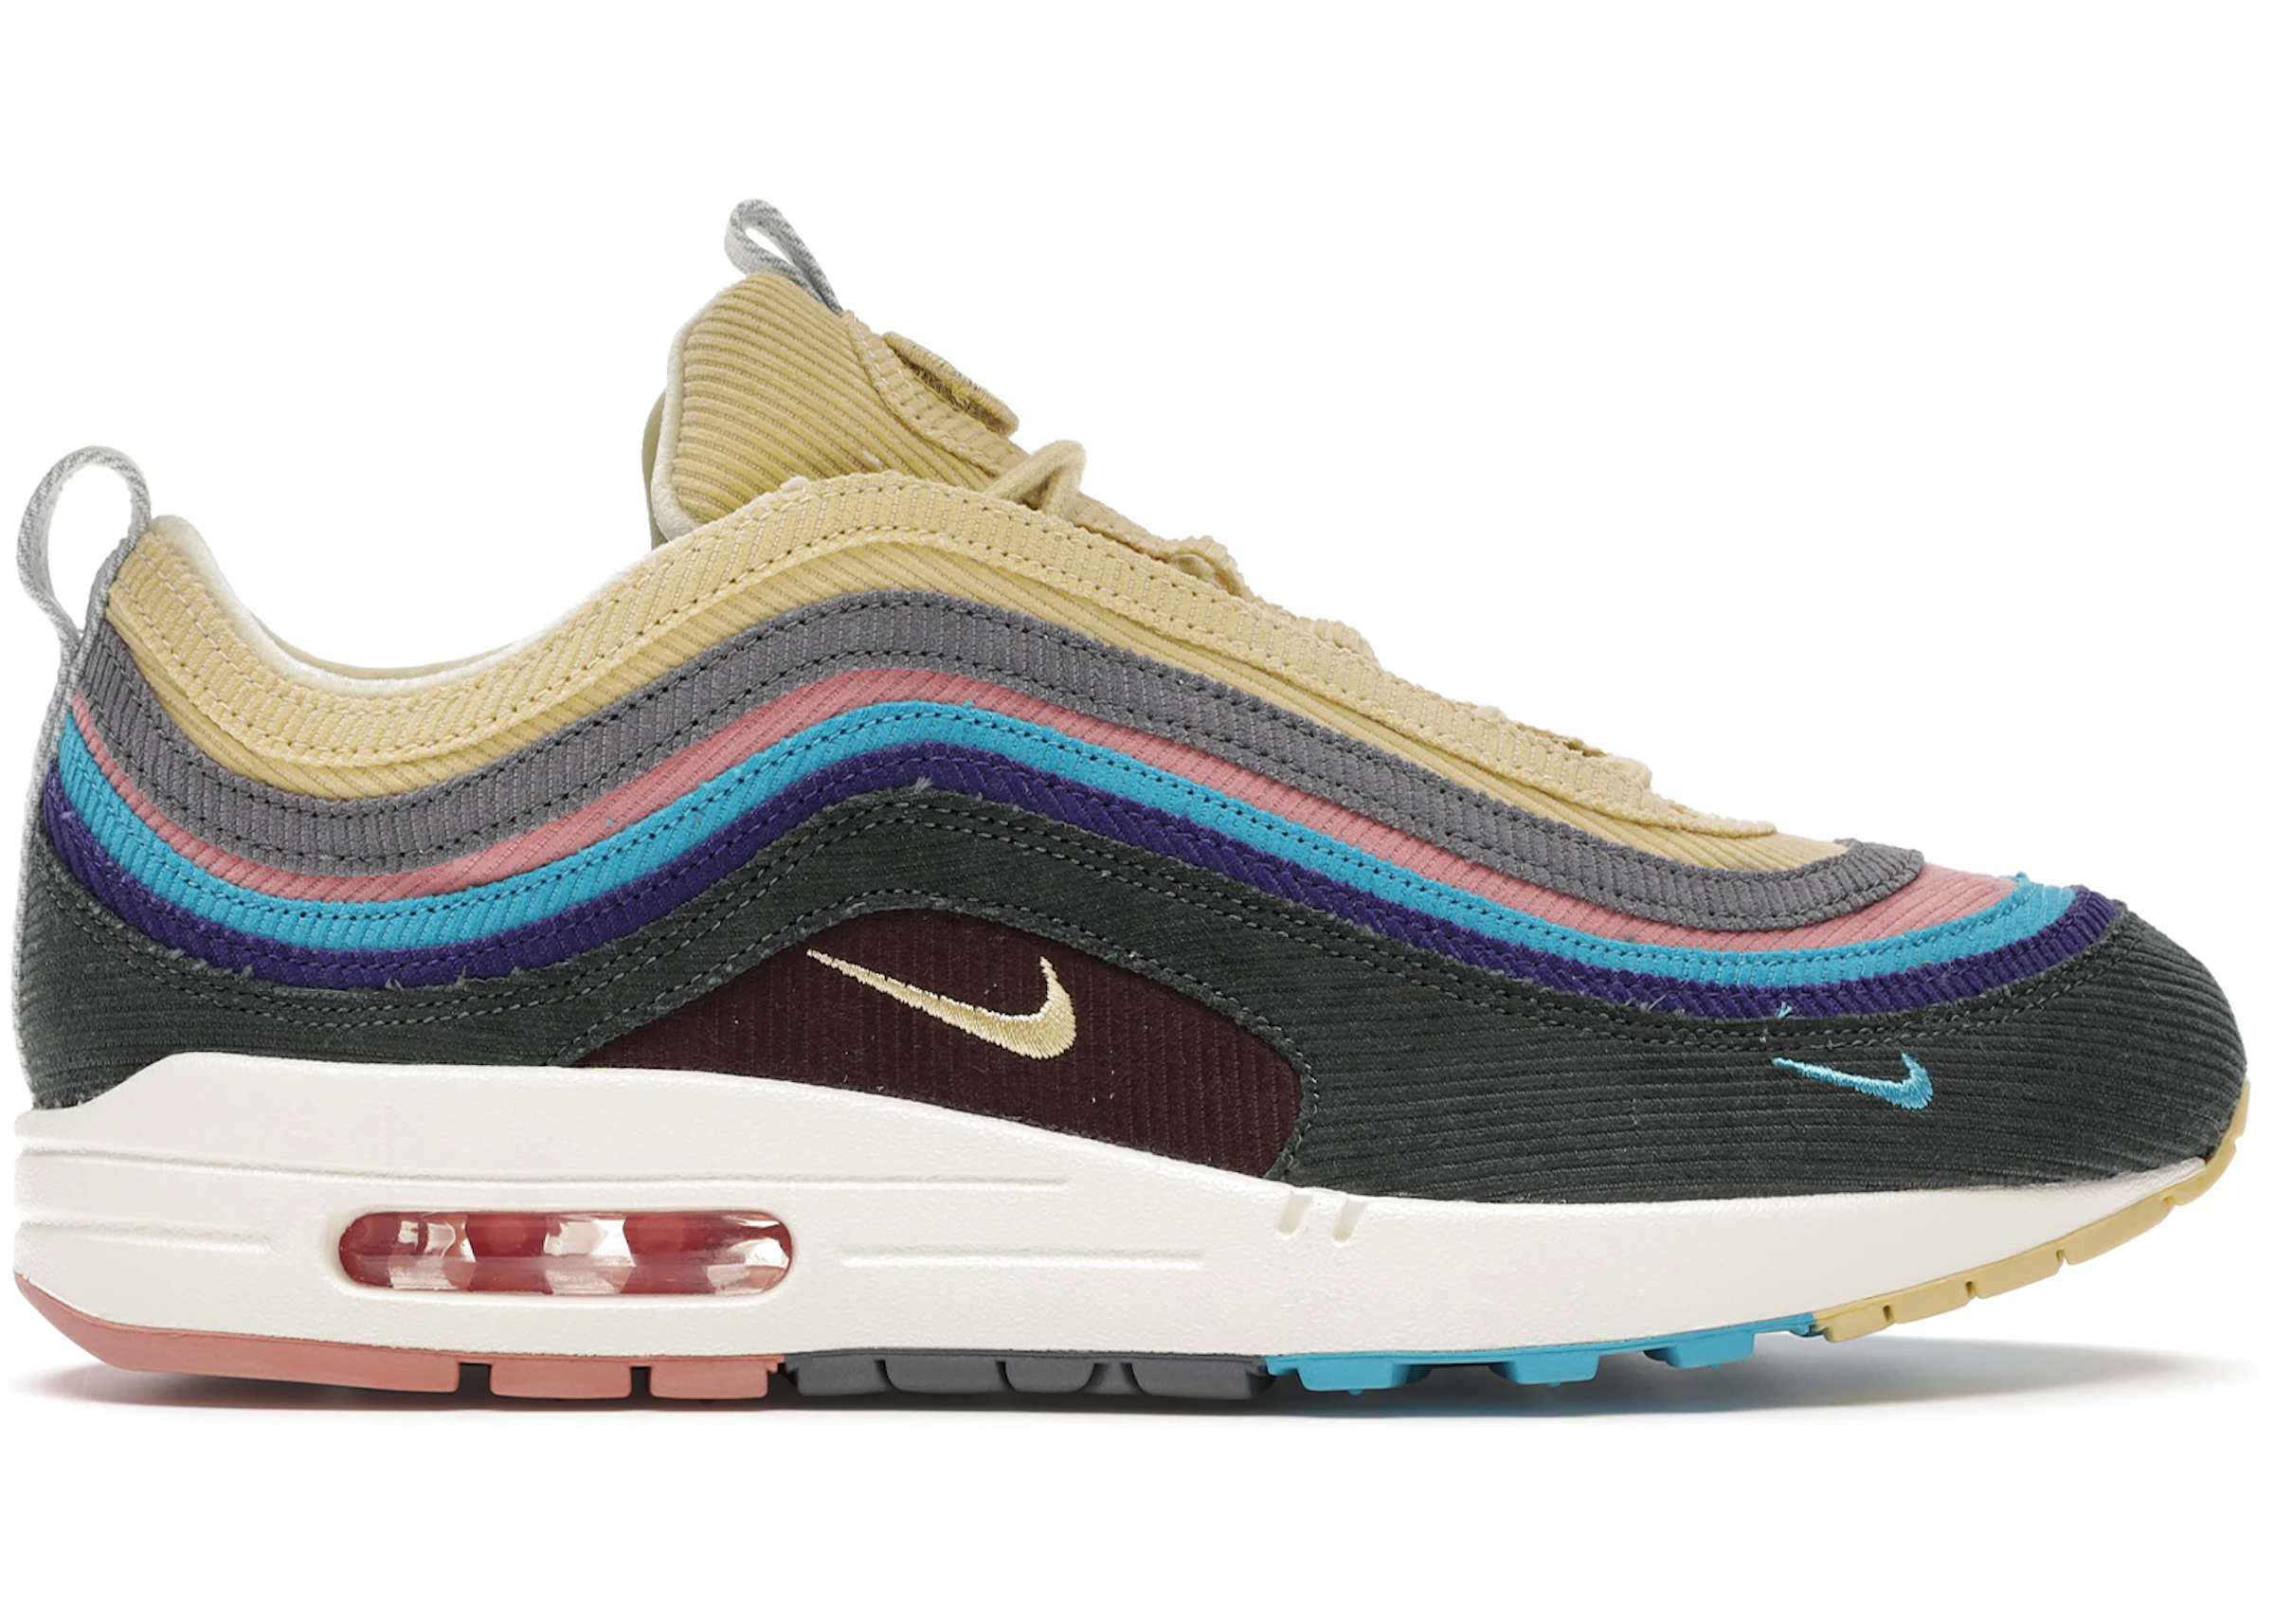 Production center Contradict necklace Nike Air Max 1/97 Sean Wotherspoon (All Accessories and Dustbag) -  AJ4219-400 - US